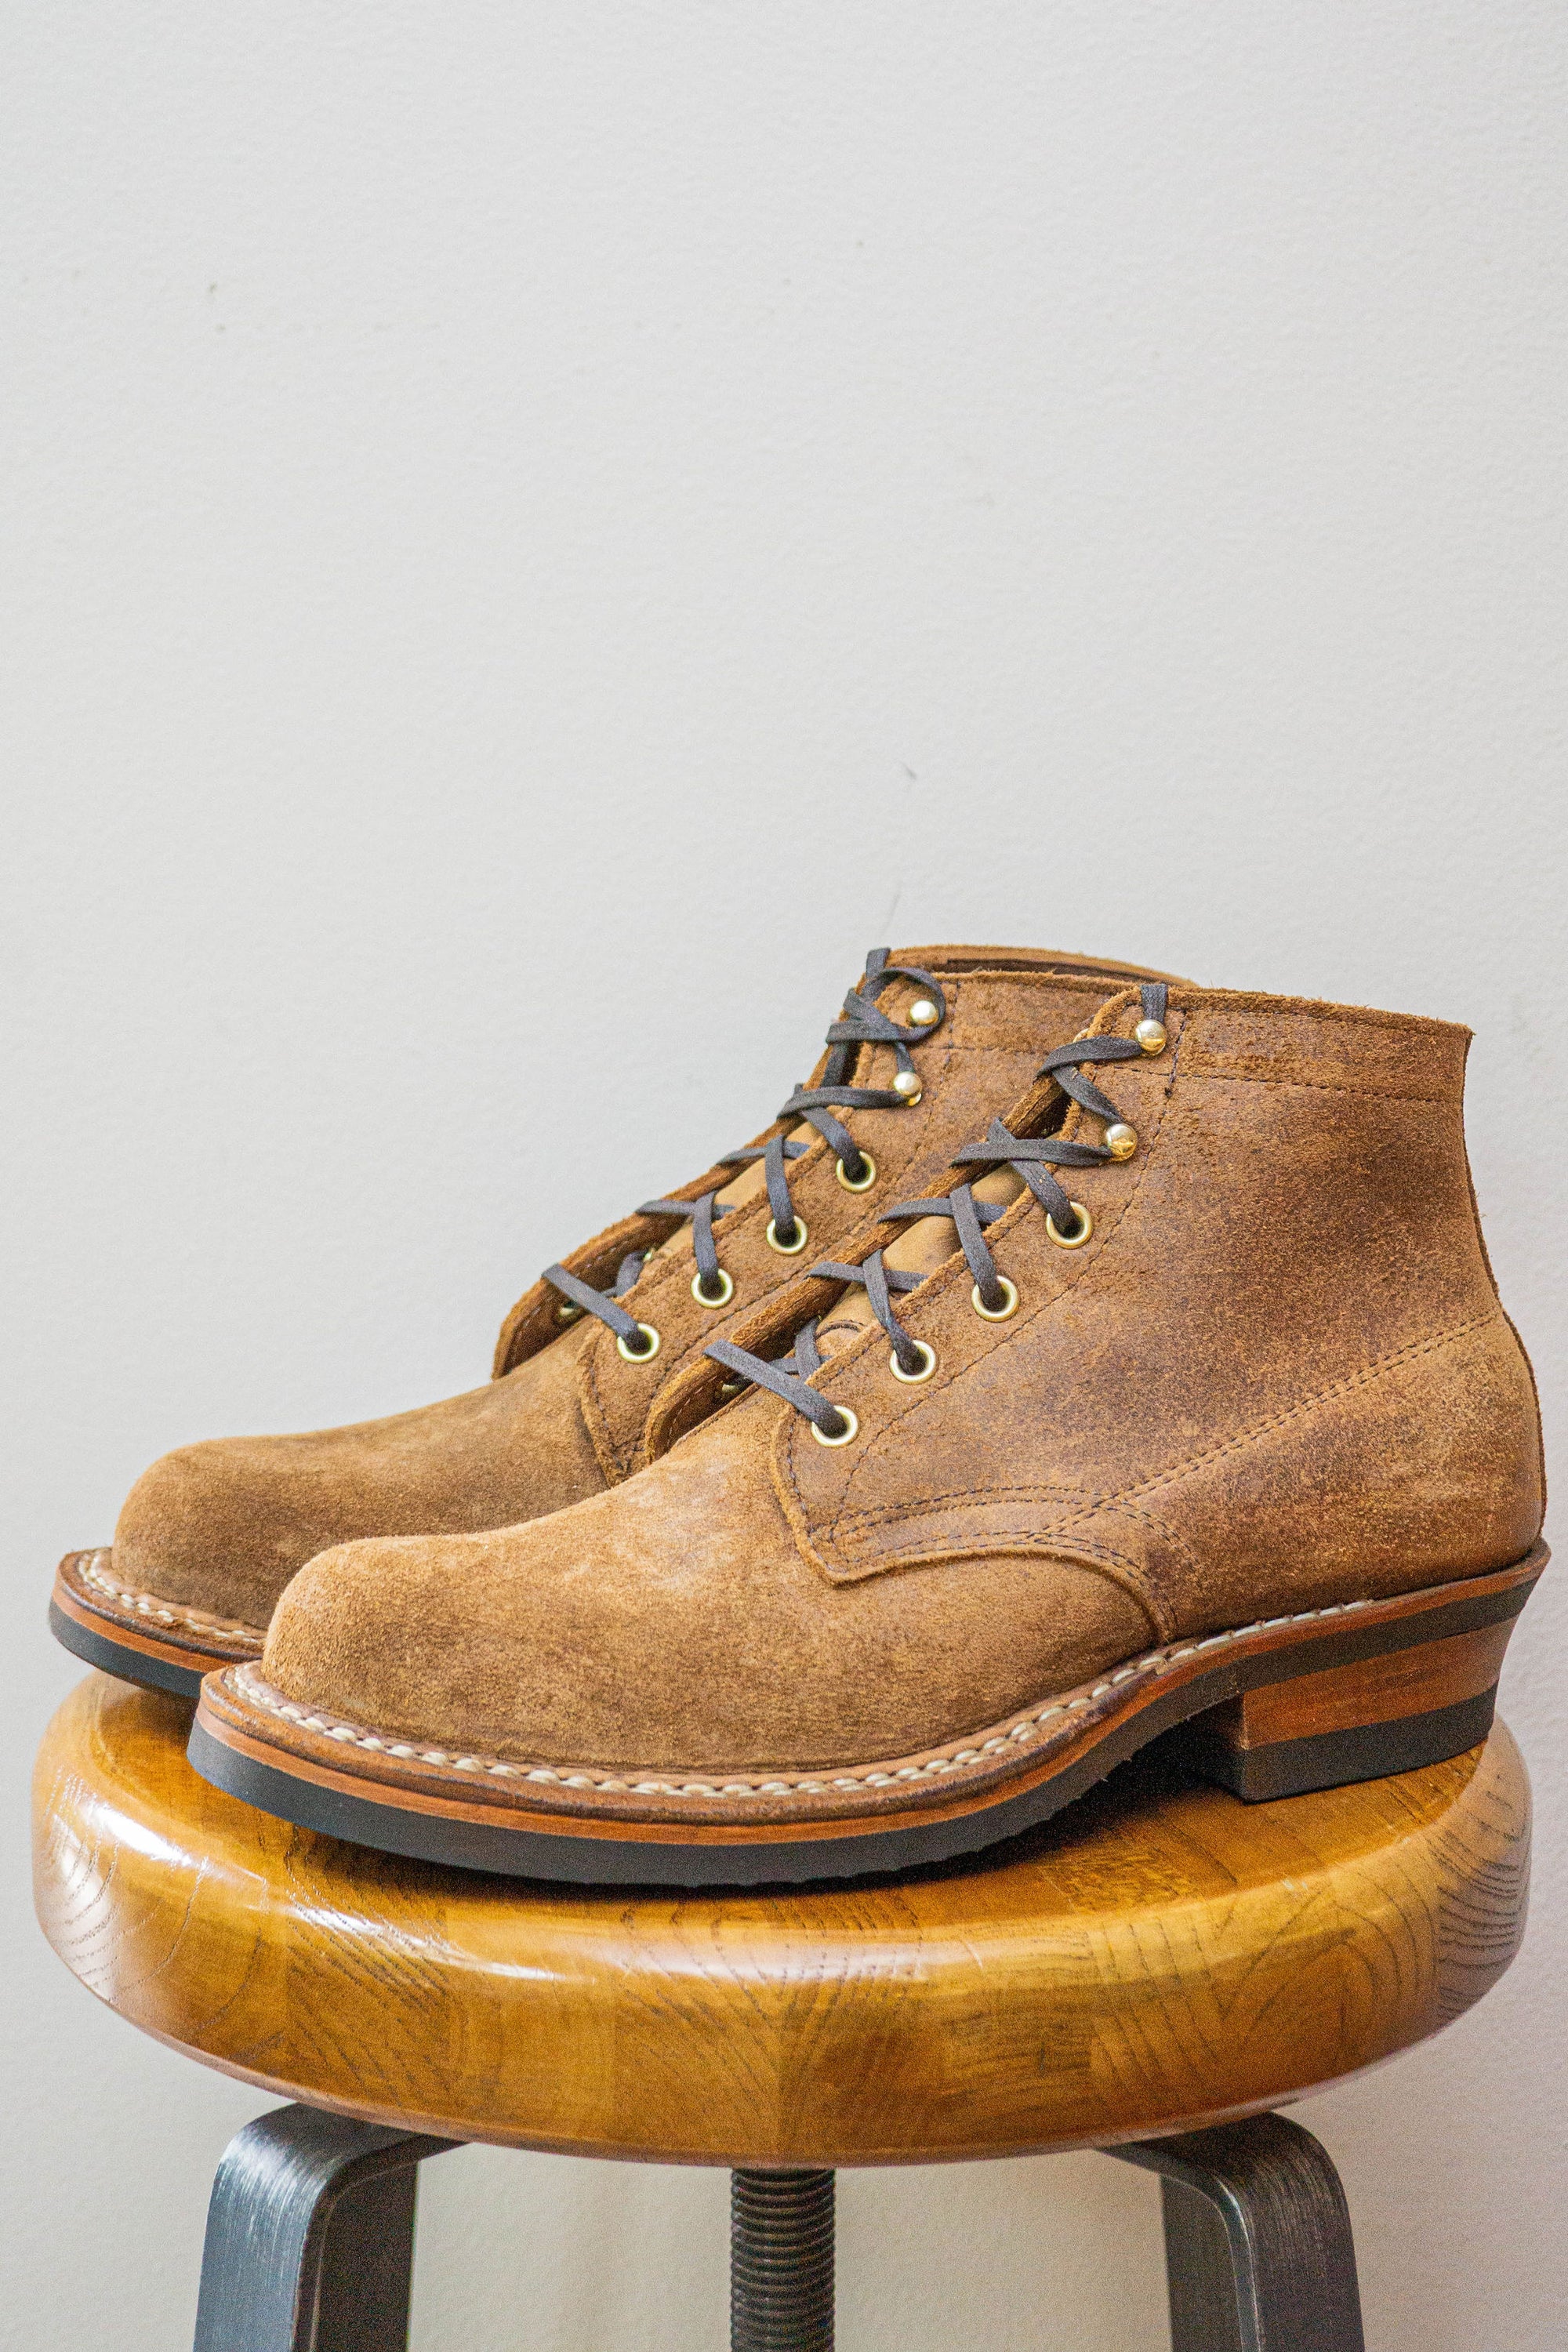 White's Boots x Franklin & Poe Semi-Dress - Distressed Roughout